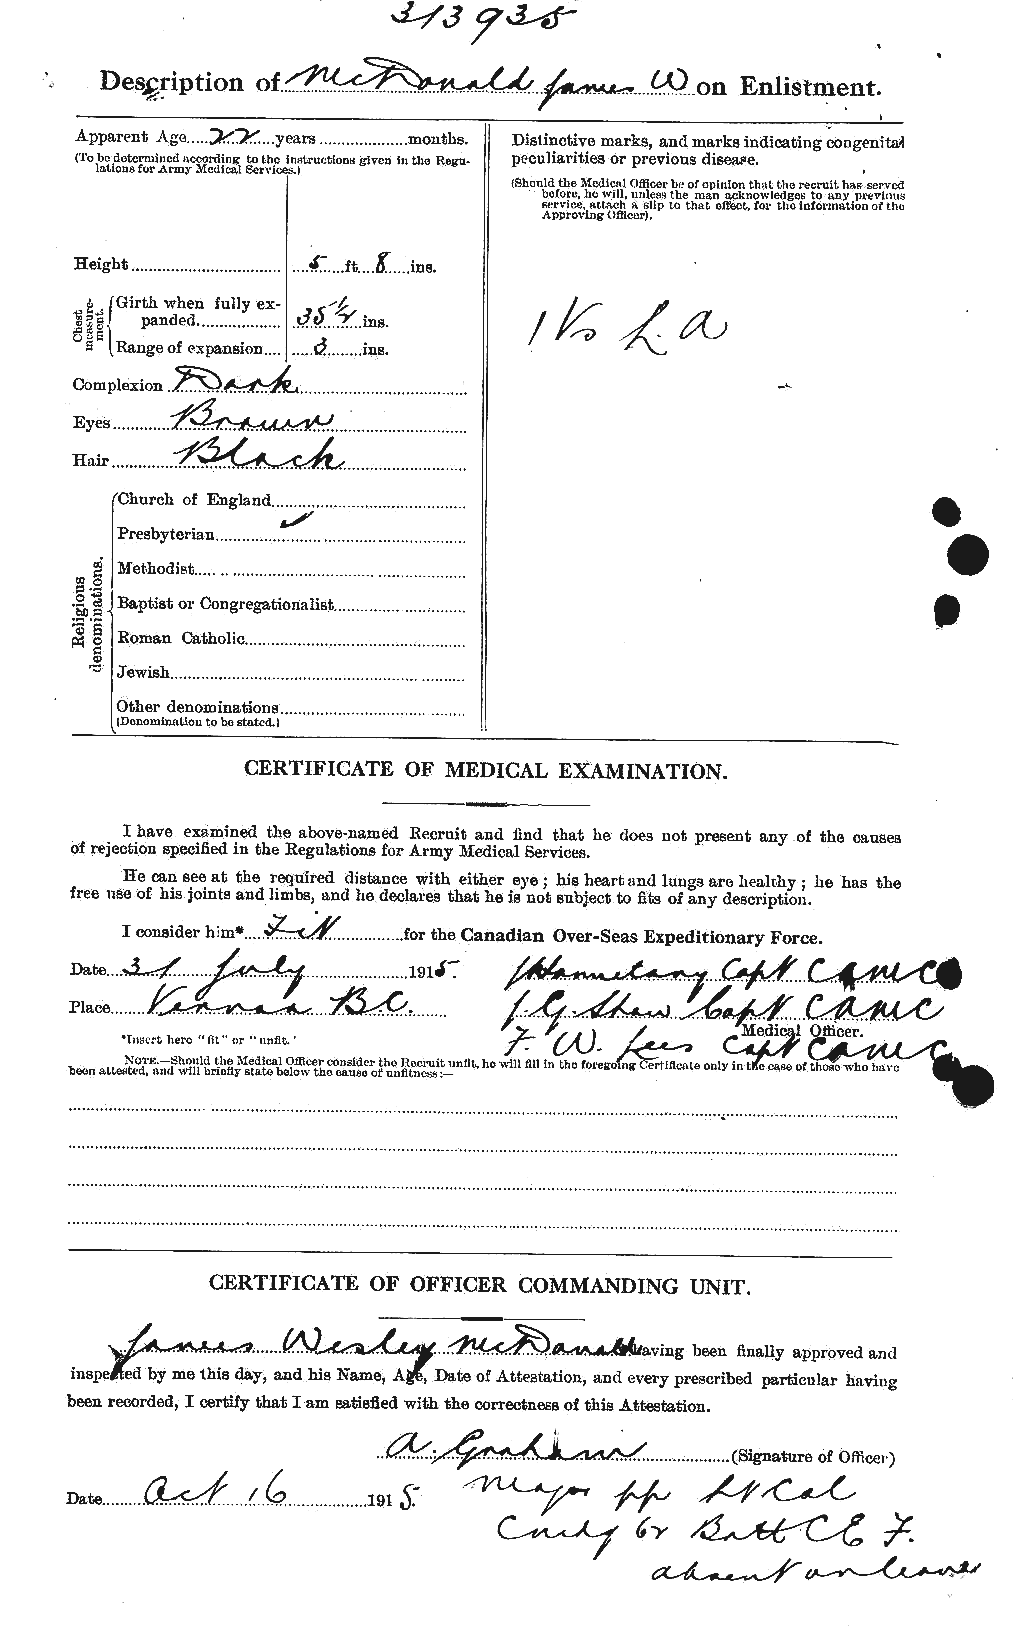 Personnel Records of the First World War - CEF 532162b